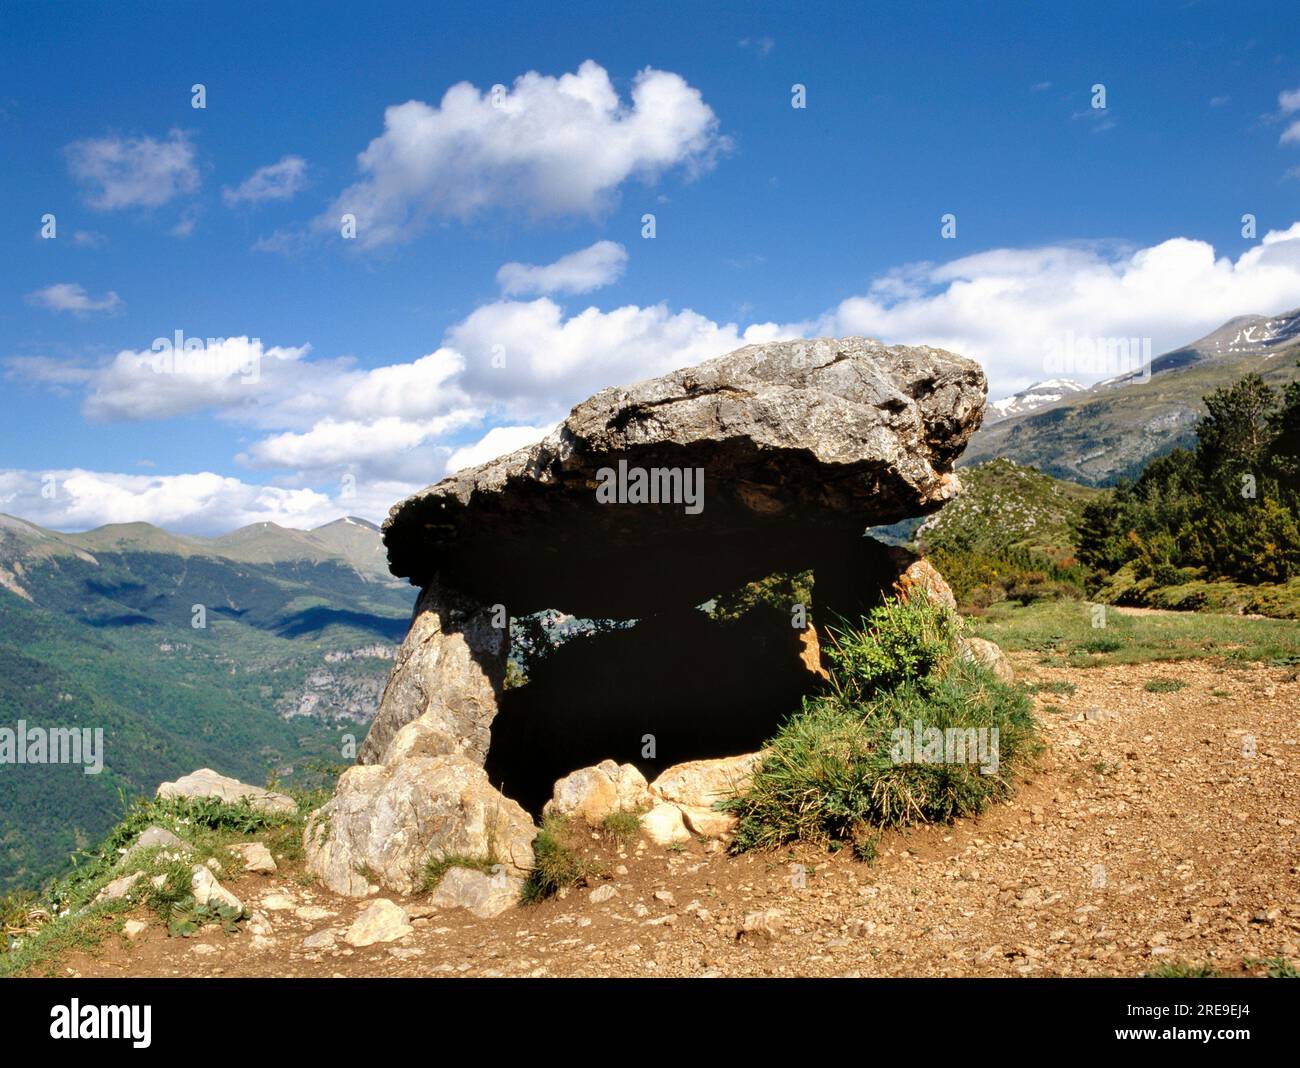 The Dolmen are megalithic burial mounds called a tumulus, a long barrow form of dolmen, dating from 3750–3650 BCE approximately. Near Antequera, Málag Stock Photo